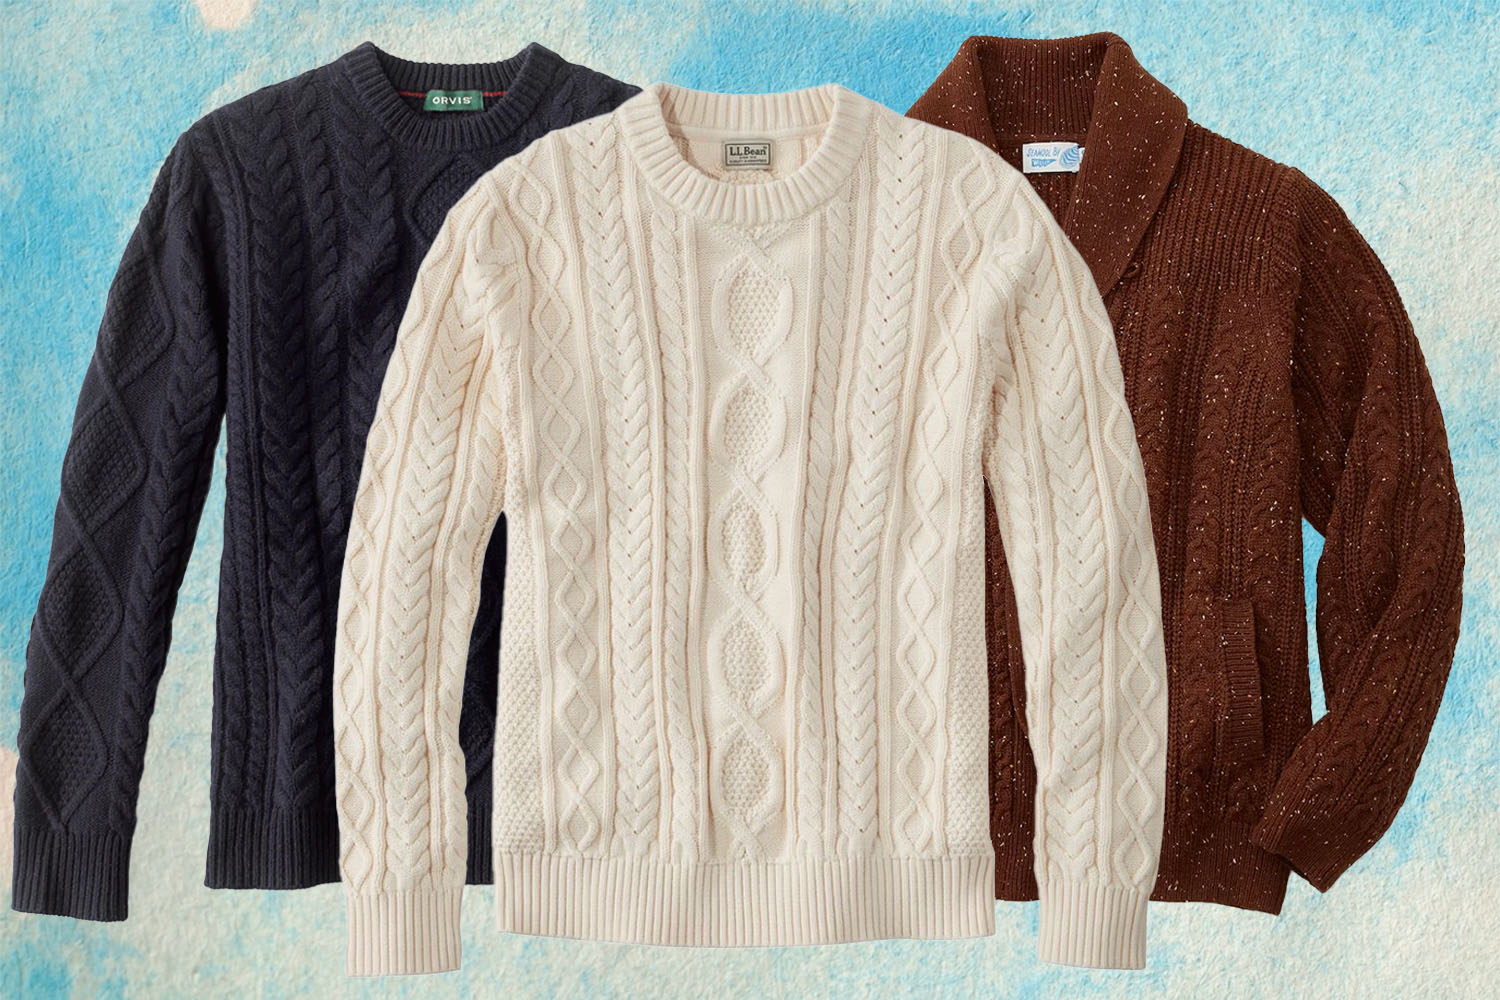 HOW TO SCORE TWO CABLE KNIT CASHMERE SWEATERS FOR THE PRICE OF ONE